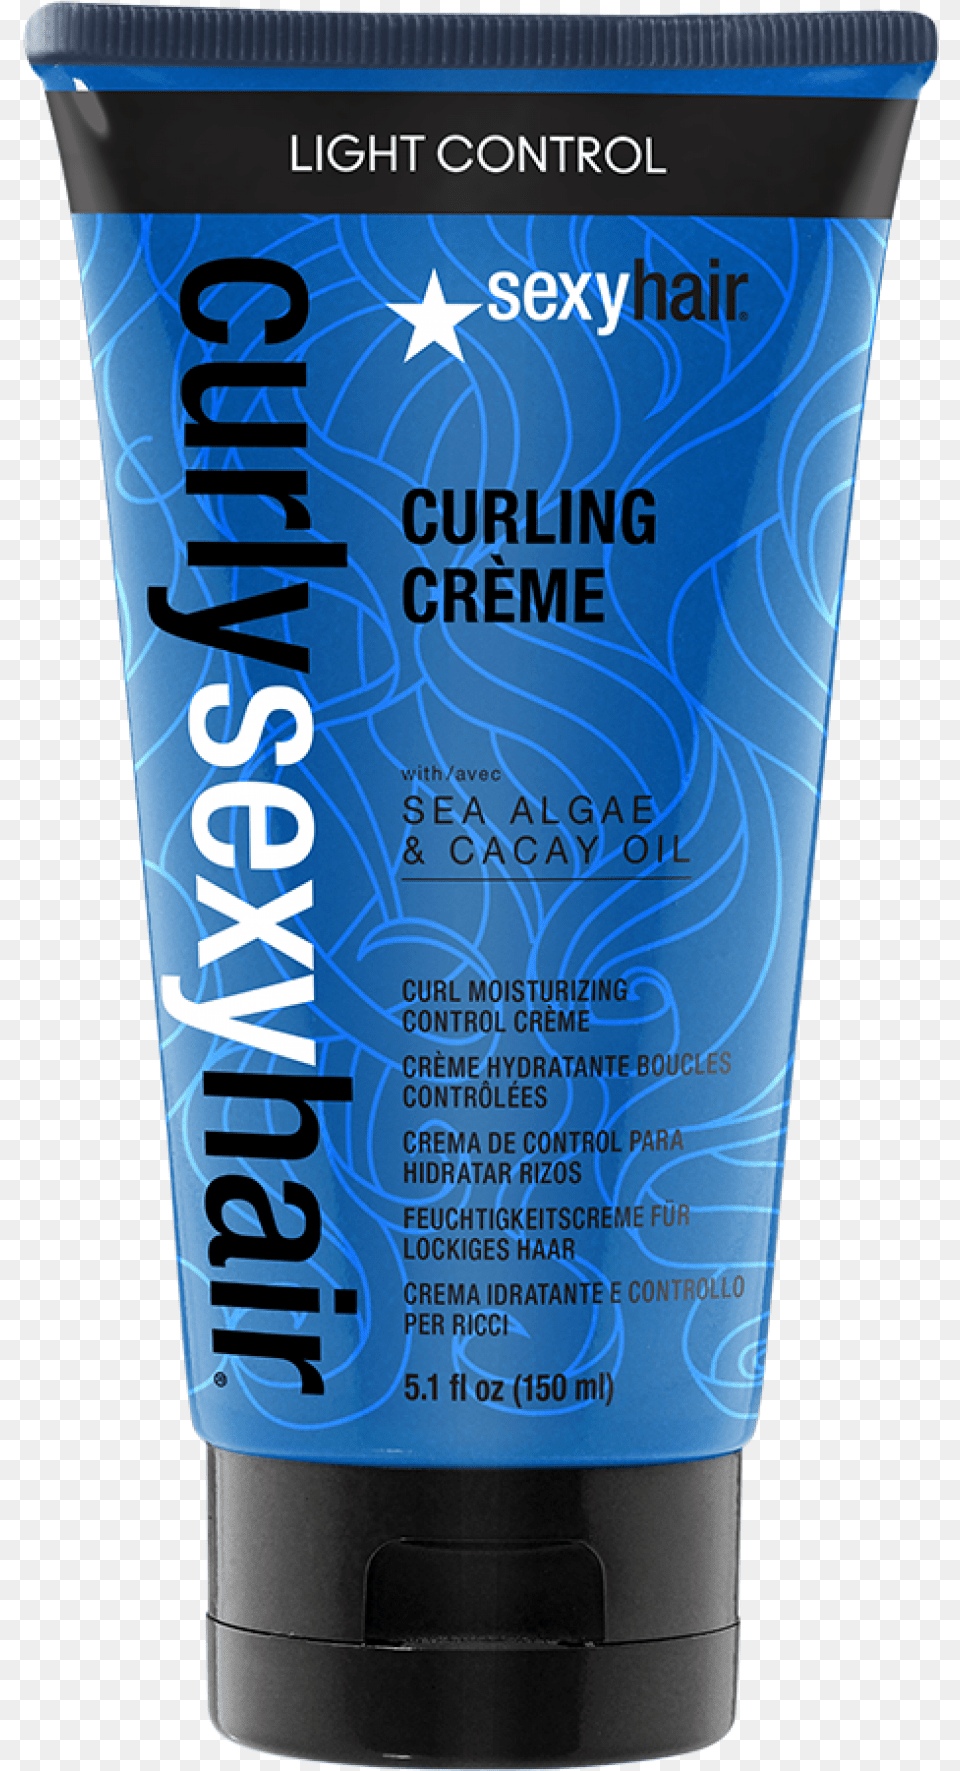 Curling Crme Curl Moisturizing Control Creme Sexy Hair Curls Cream, Bottle, Cosmetics, Aftershave, Can Png Image